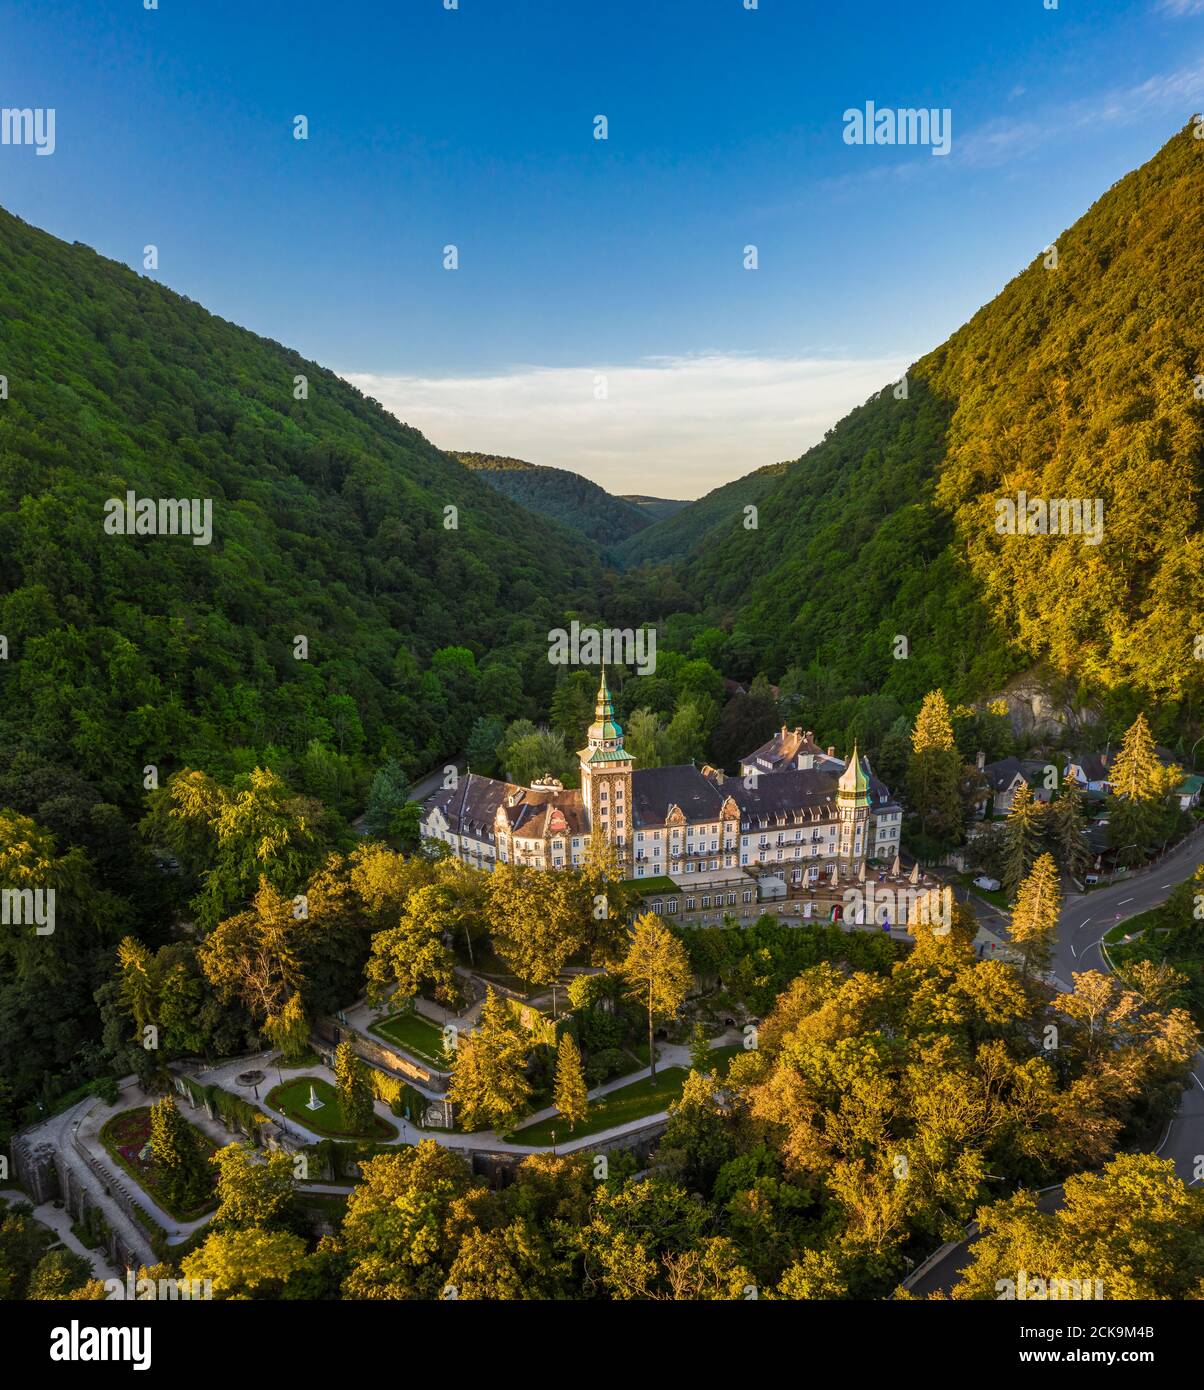 Lillafured, Hungary - Aerial view of the famous Lillafured Castle in the mountains of Bukk near Miskolc on a sunny summer morning Stock Photo